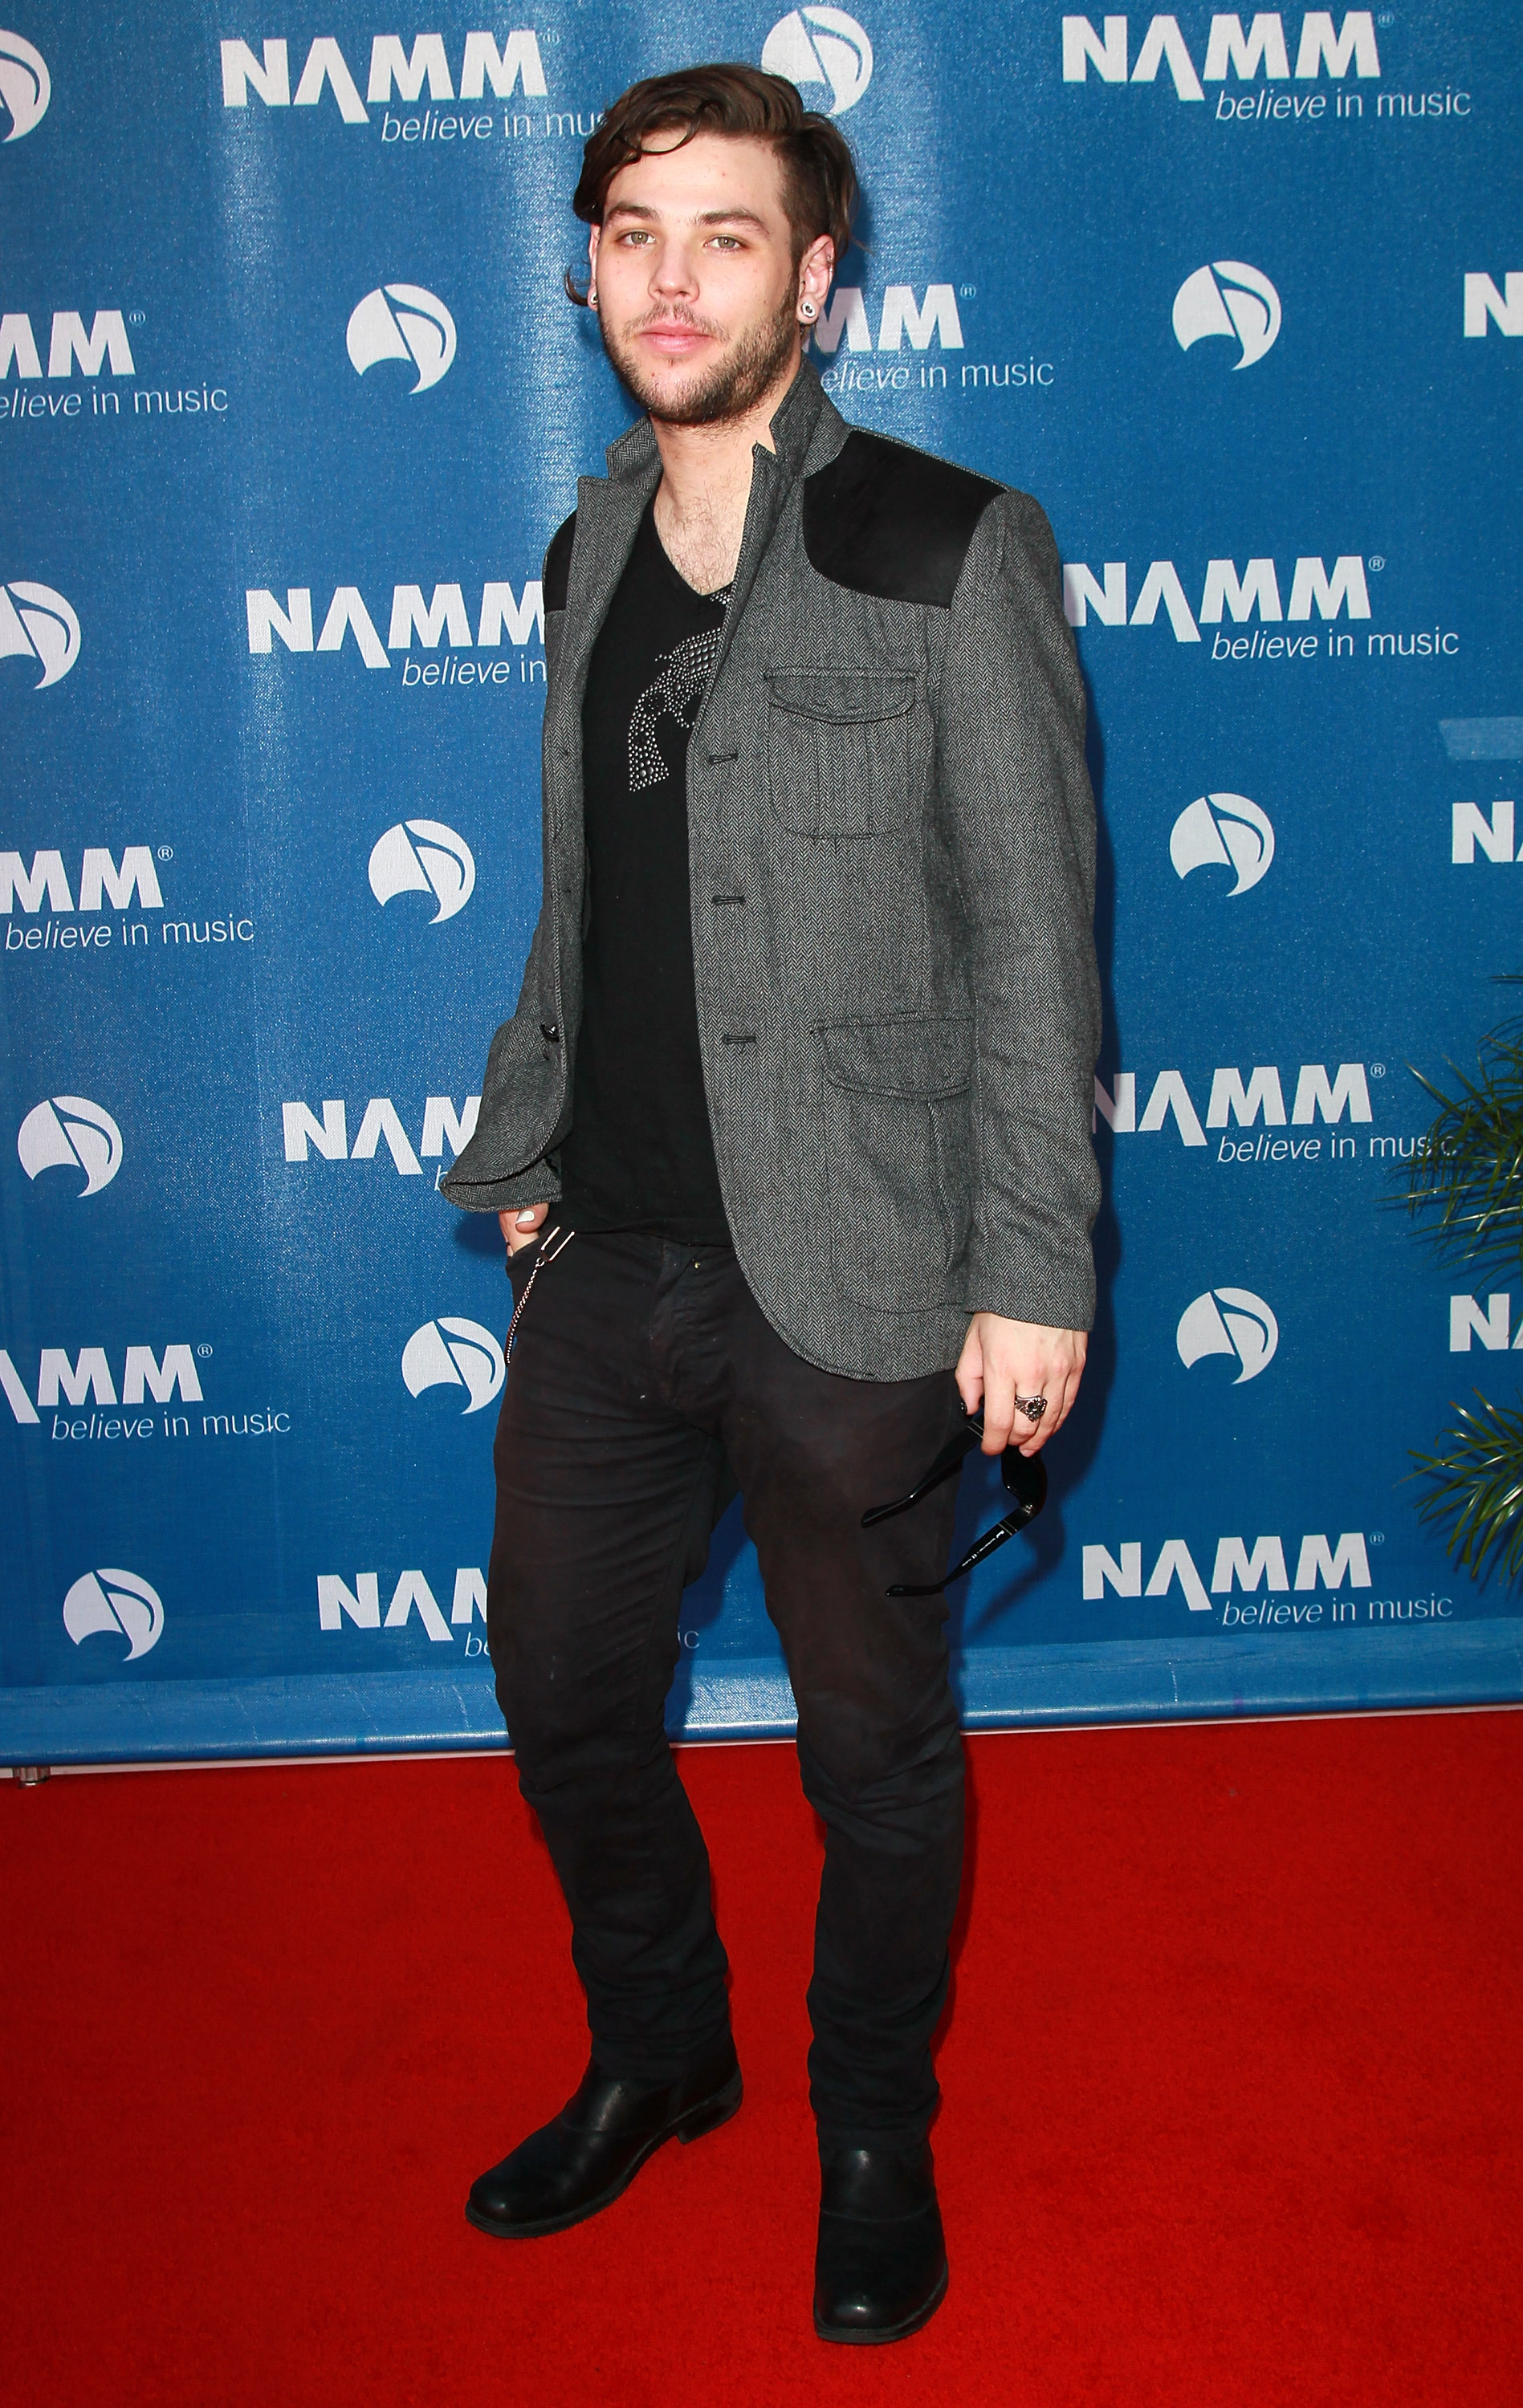 Navarone Garibaldi at the 110th NAMM Show - Day 1 at the Anaheim Convention Center in Anaheim, California, on January 19, 2012 | Source: Getty Images